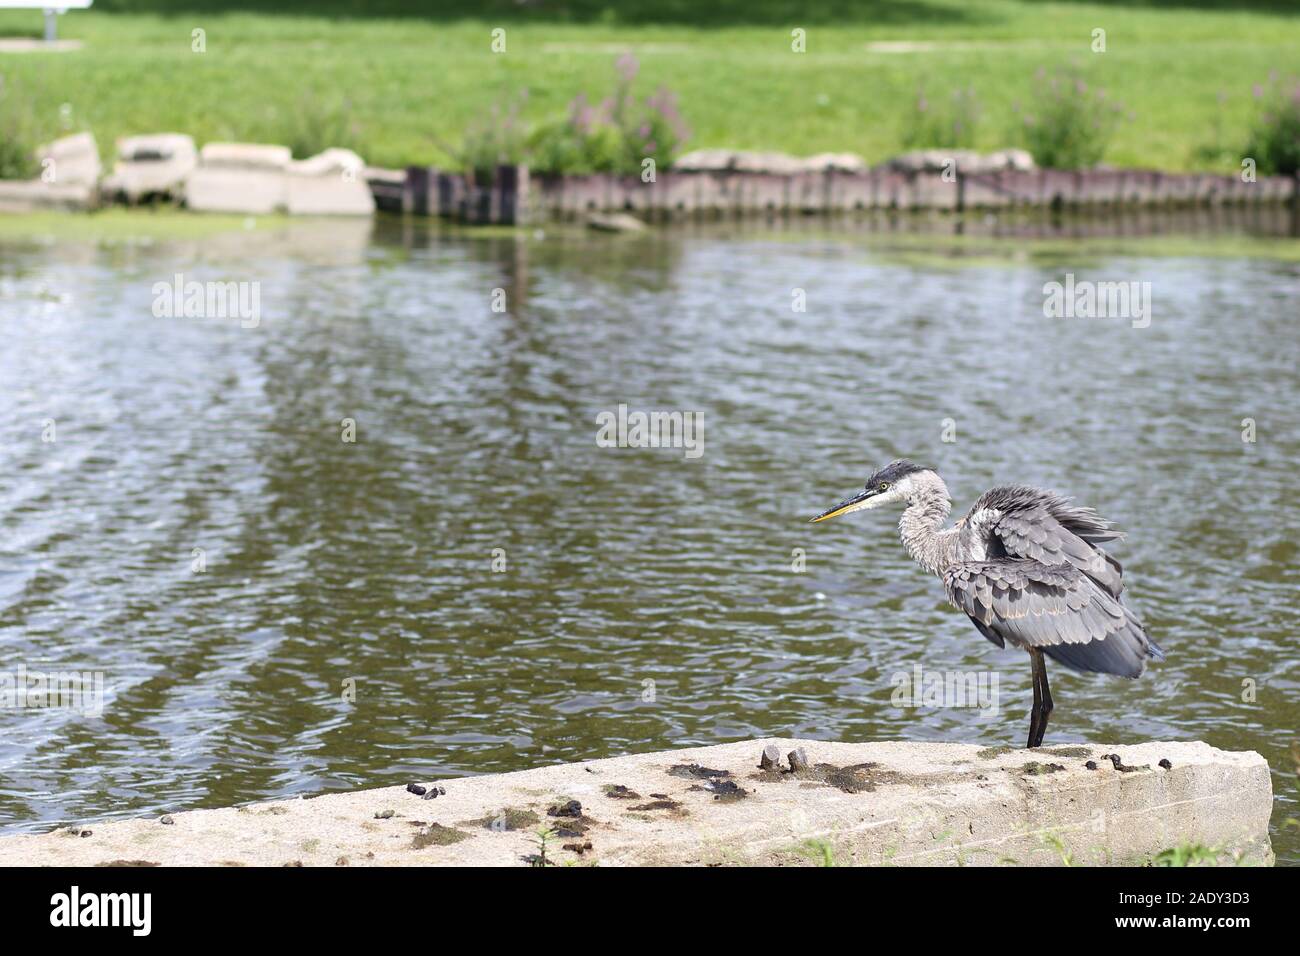 A great blue heron standing next to a large concrete slab on the shore of a river in a park Stock Photo